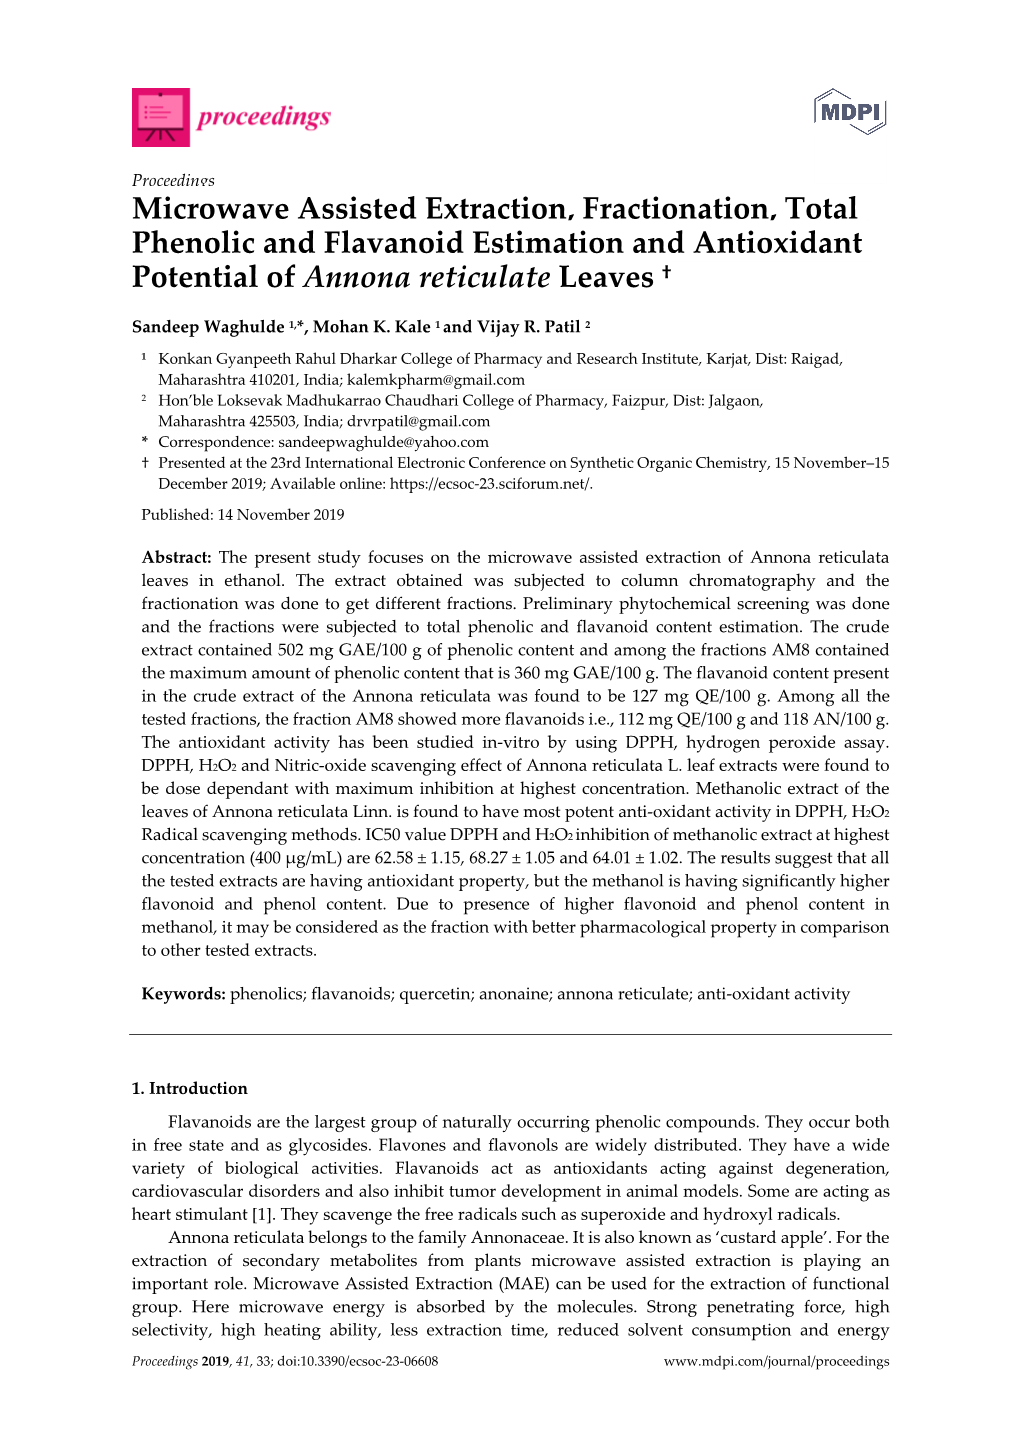 Microwave Assisted Extraction, Fractionation, Total Phenolic and Flavanoid Estimation and Antioxidant Potential of Annona Reticulate Leaves †